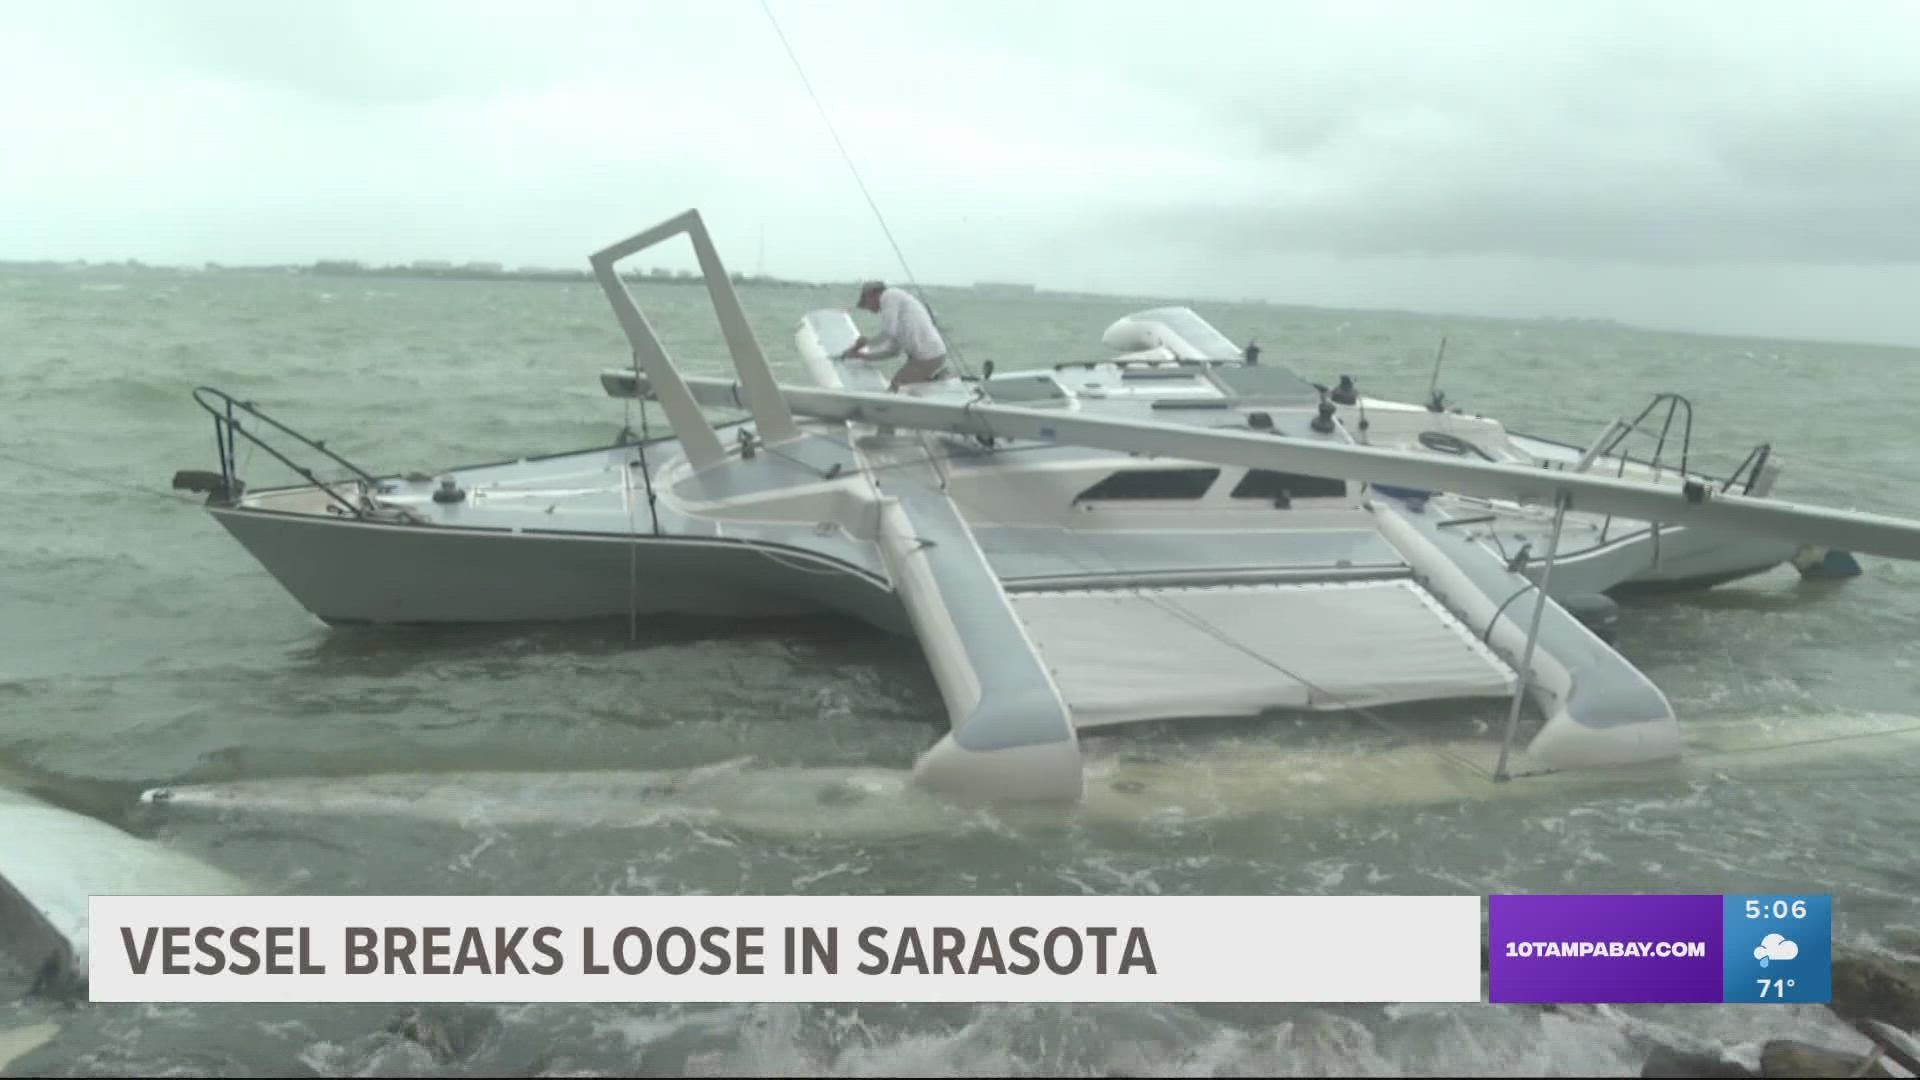 The boat which measured around 40ft broke off from its mooring and crashed into the Tony Saprito Fishing Pier, breaking off part of its railing.